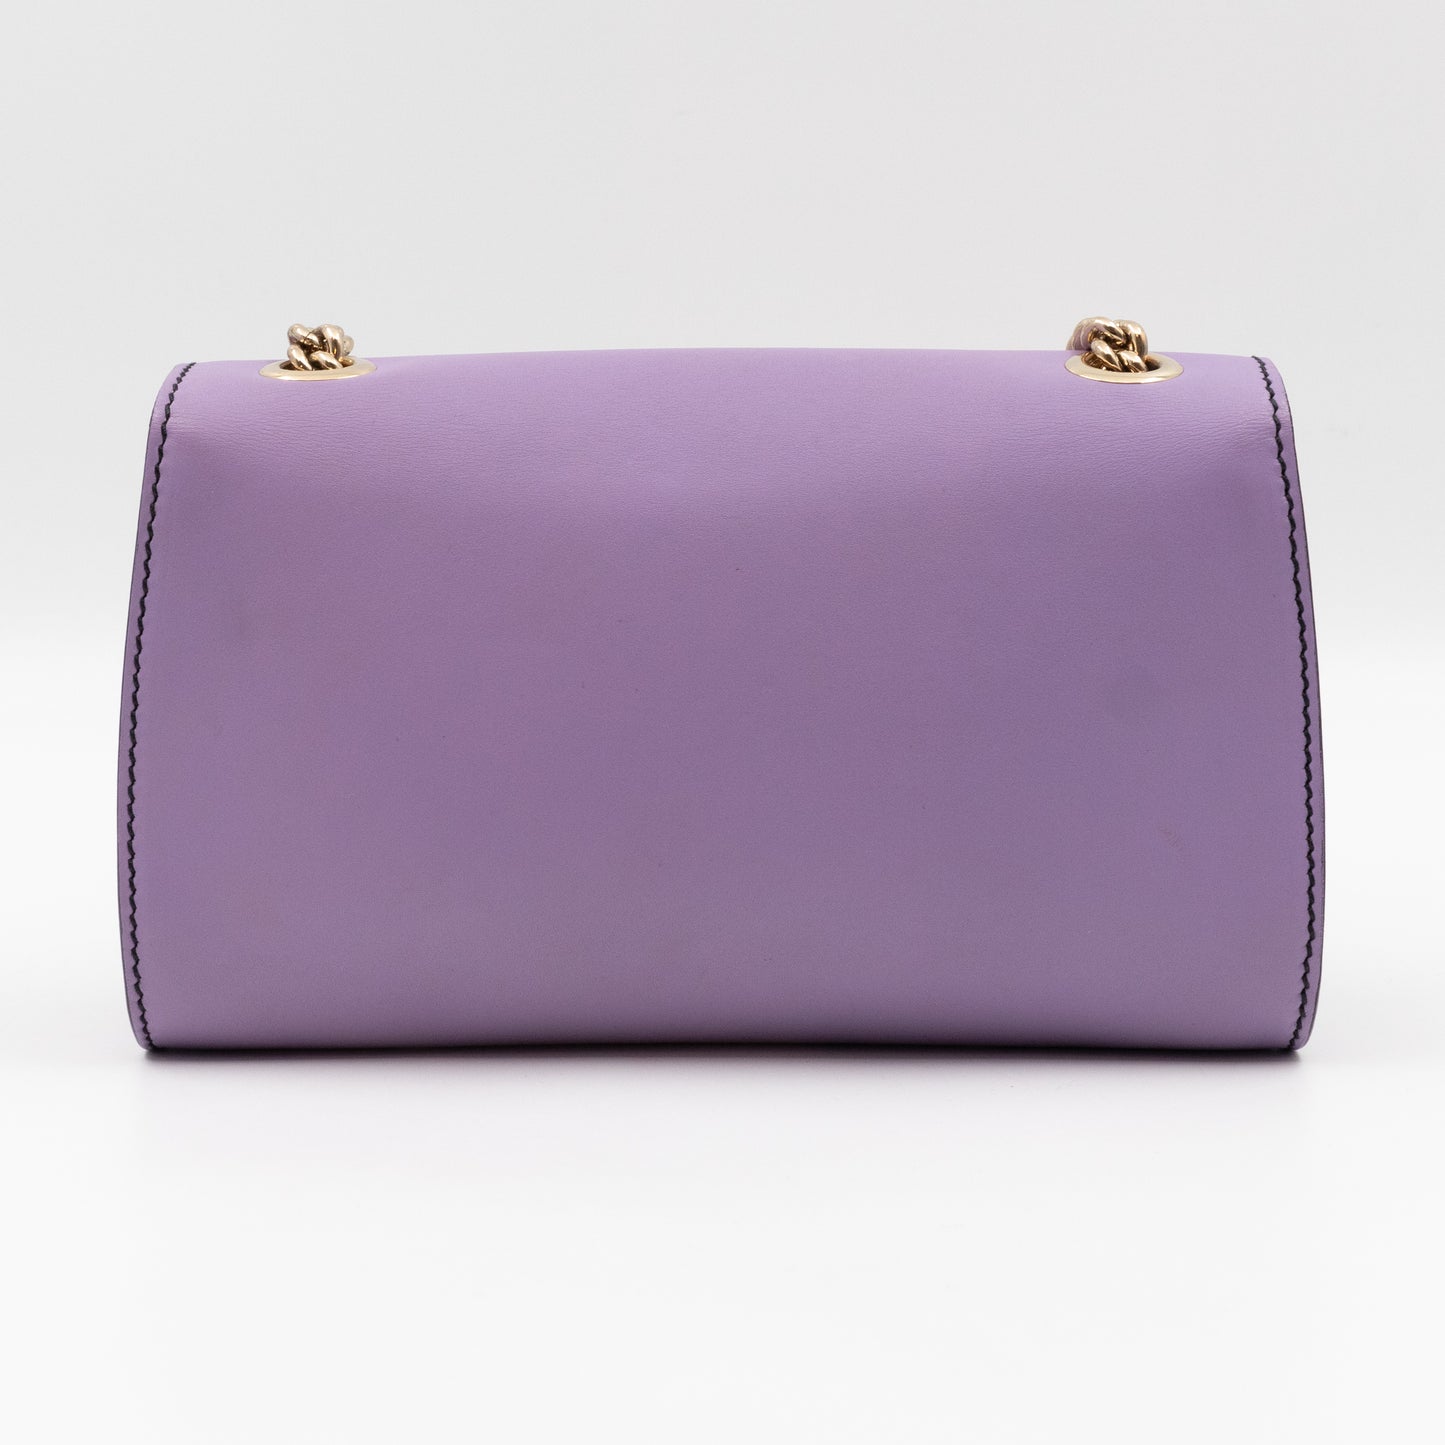 Emily Small Chain Shoulder Bag Purple Leather